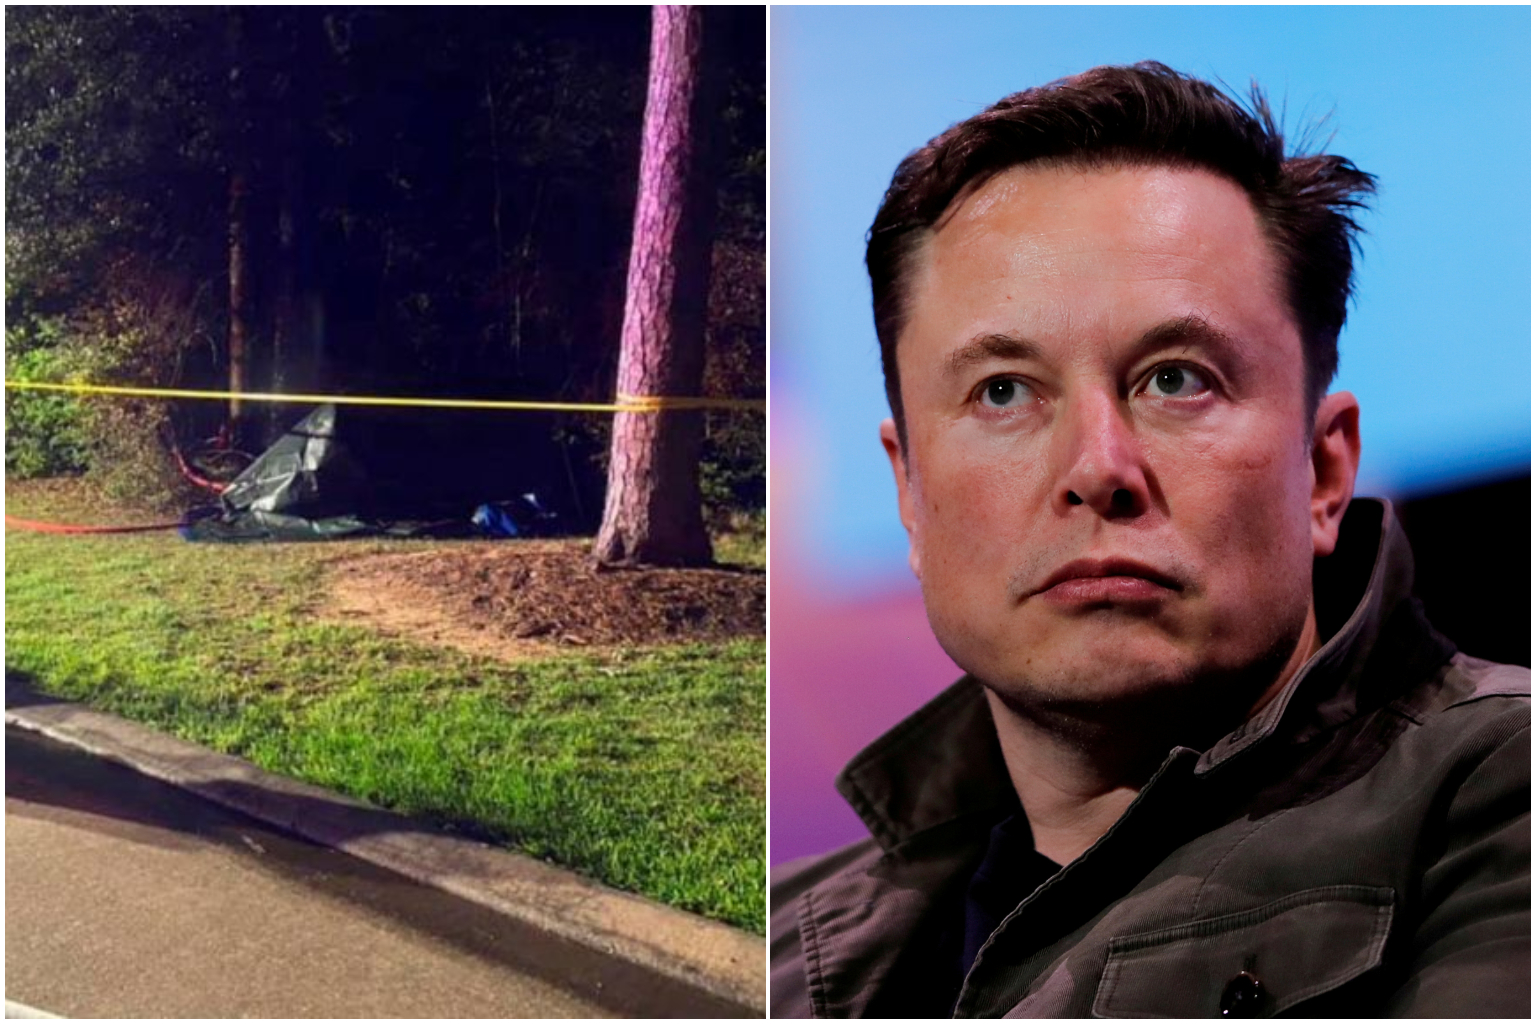 Musk tweeted, the autopilot was not activated in Tesla accident